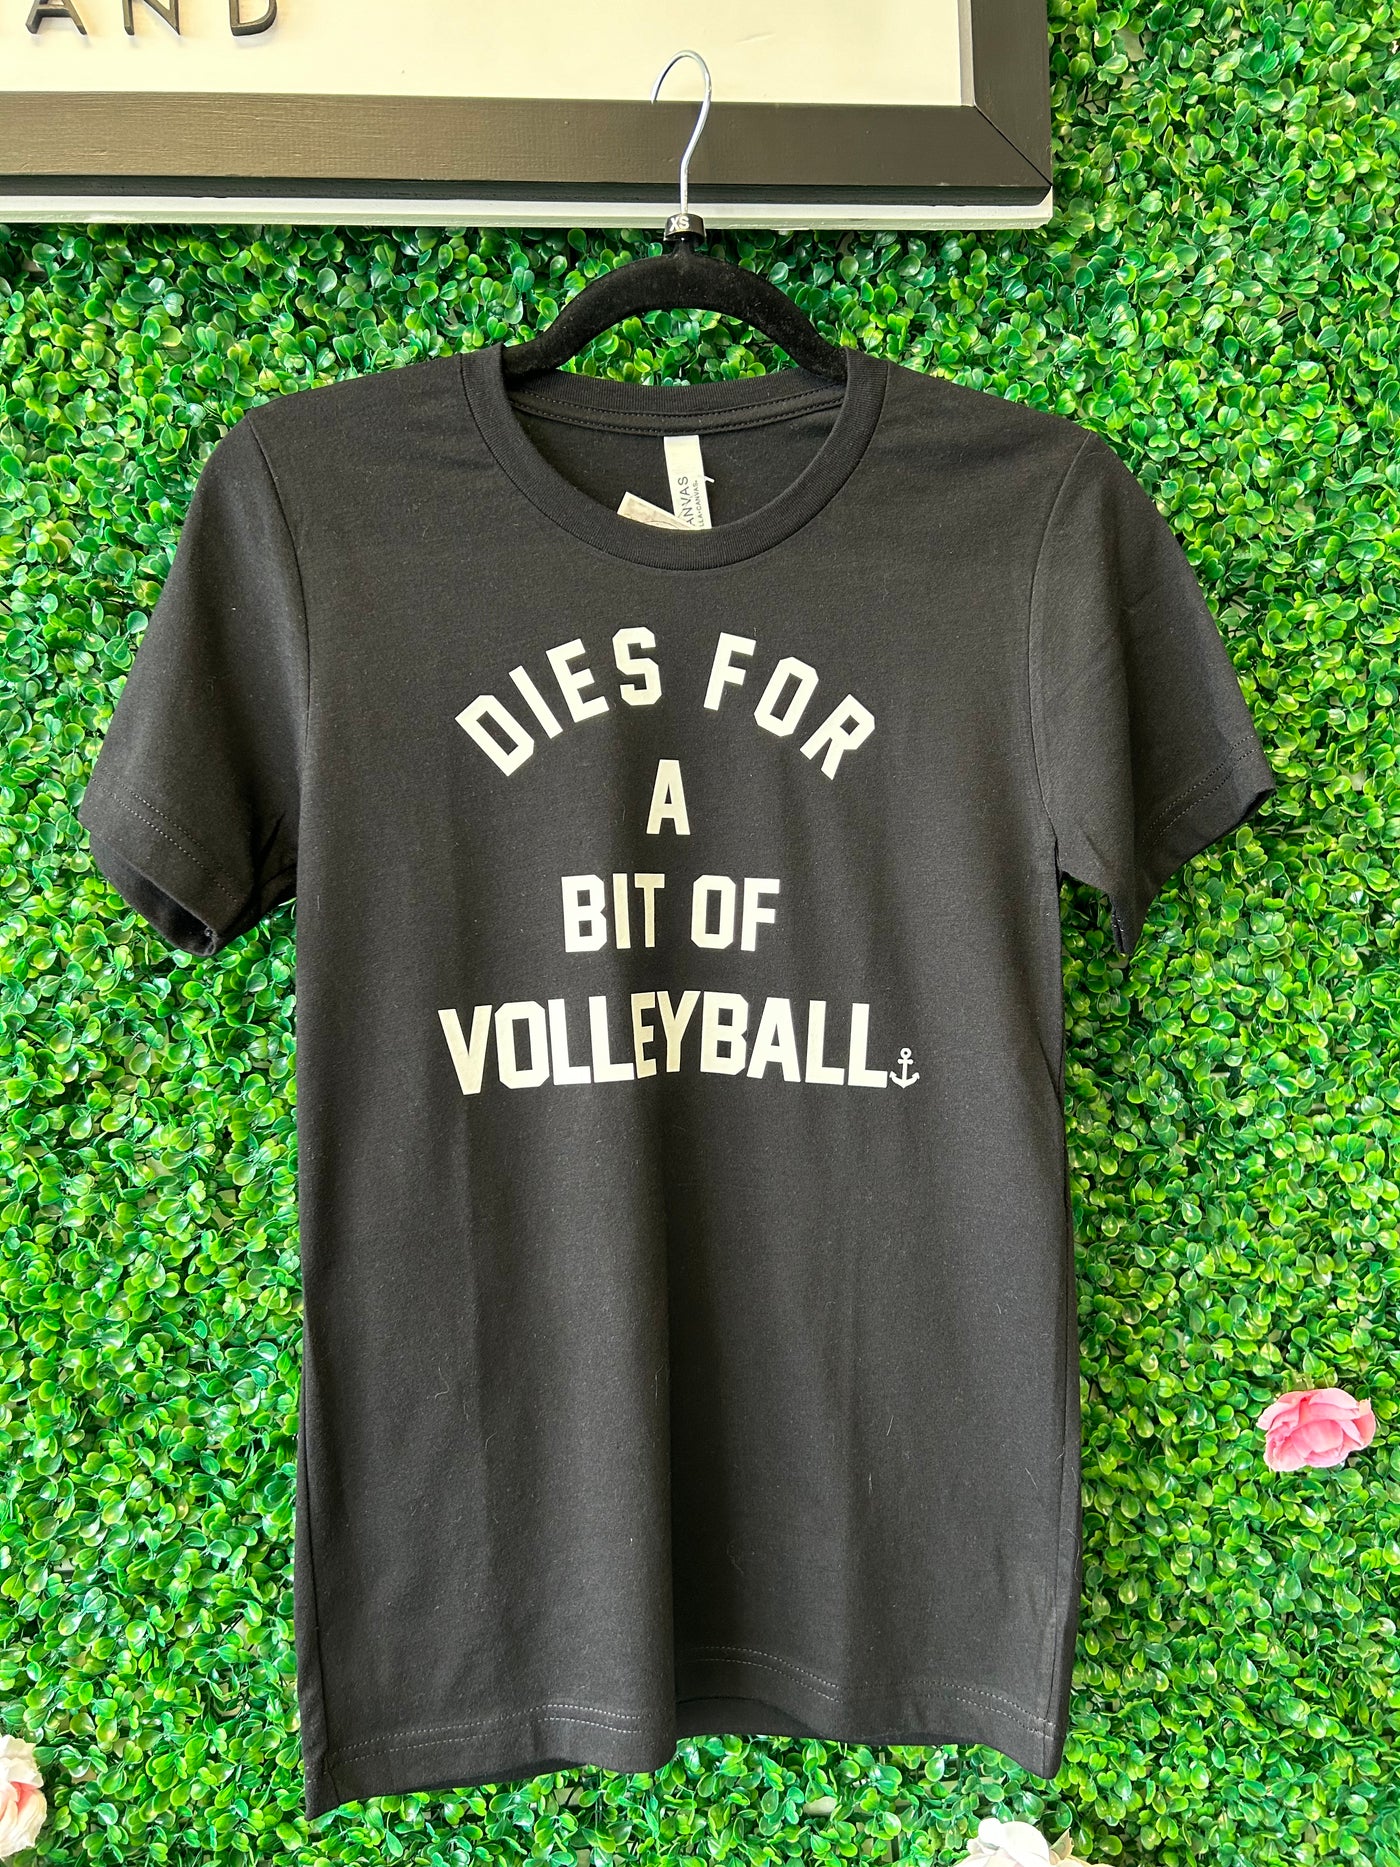 *CLEARANCE* “Dies For a Bit of Volleyball" Unisex T-Shirt  - Black - Size Adult XS